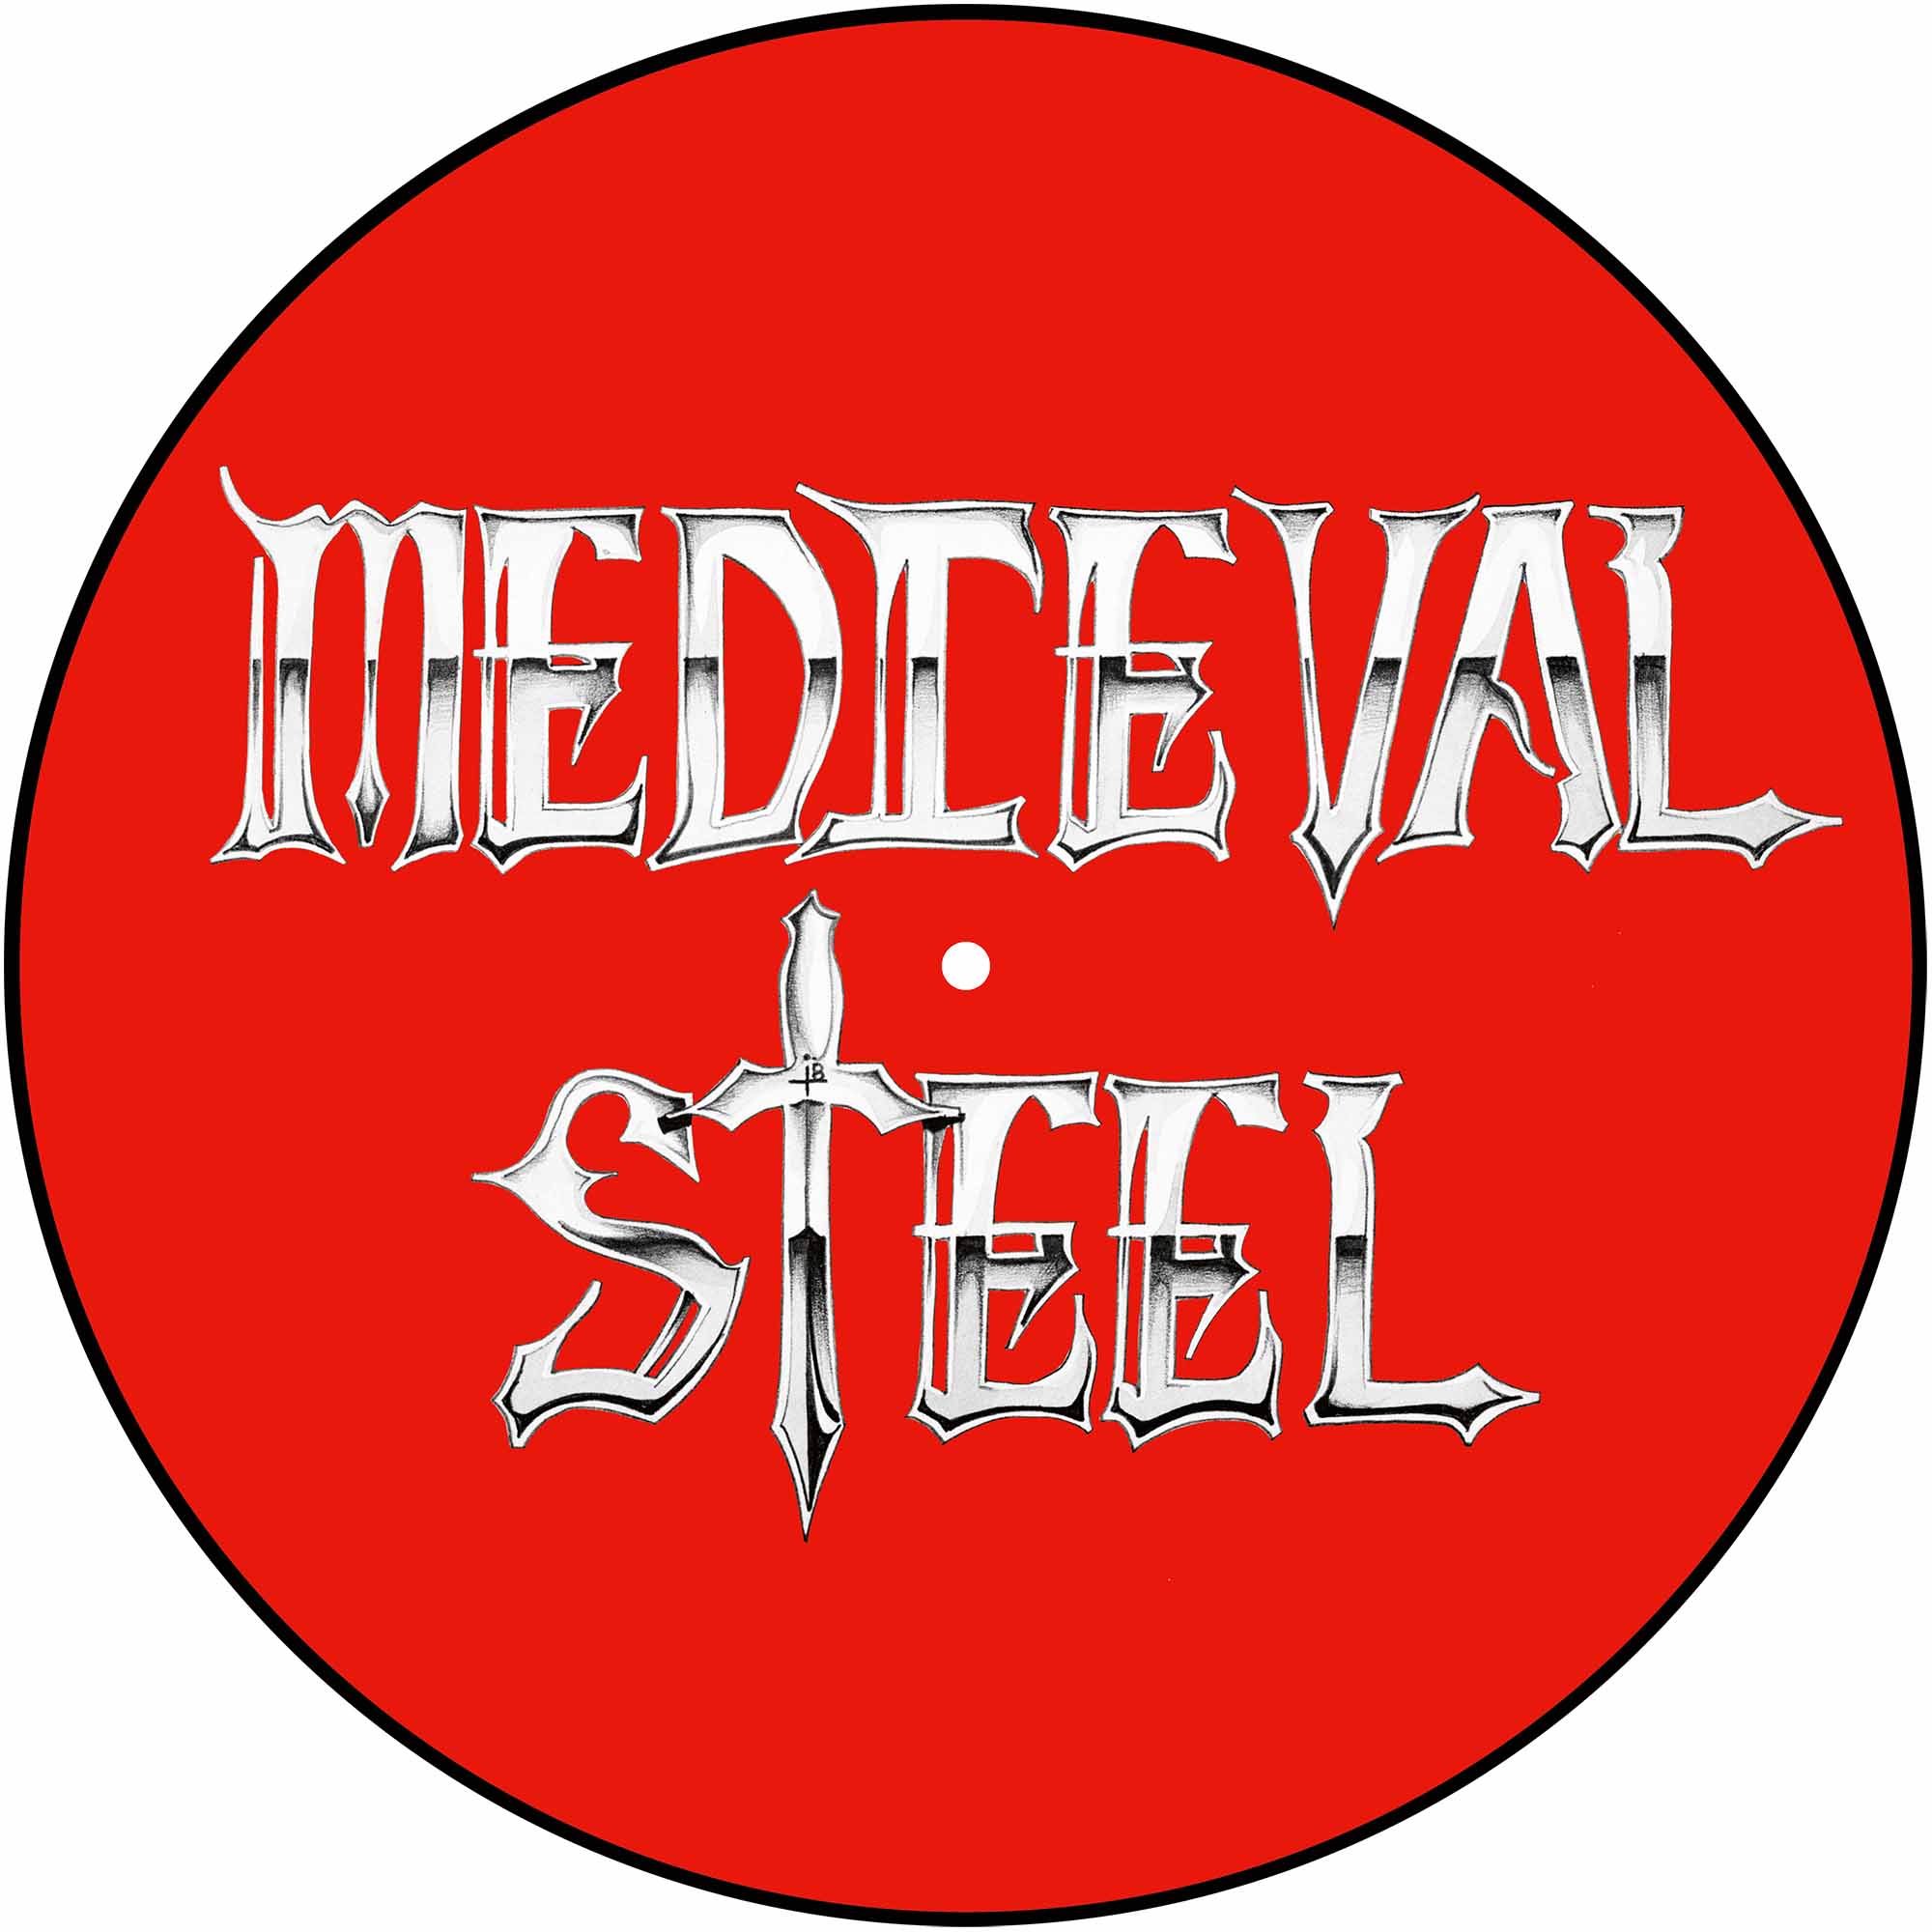 MEDIEVAL STEEL - s/t  MLP  PICTURE DISC